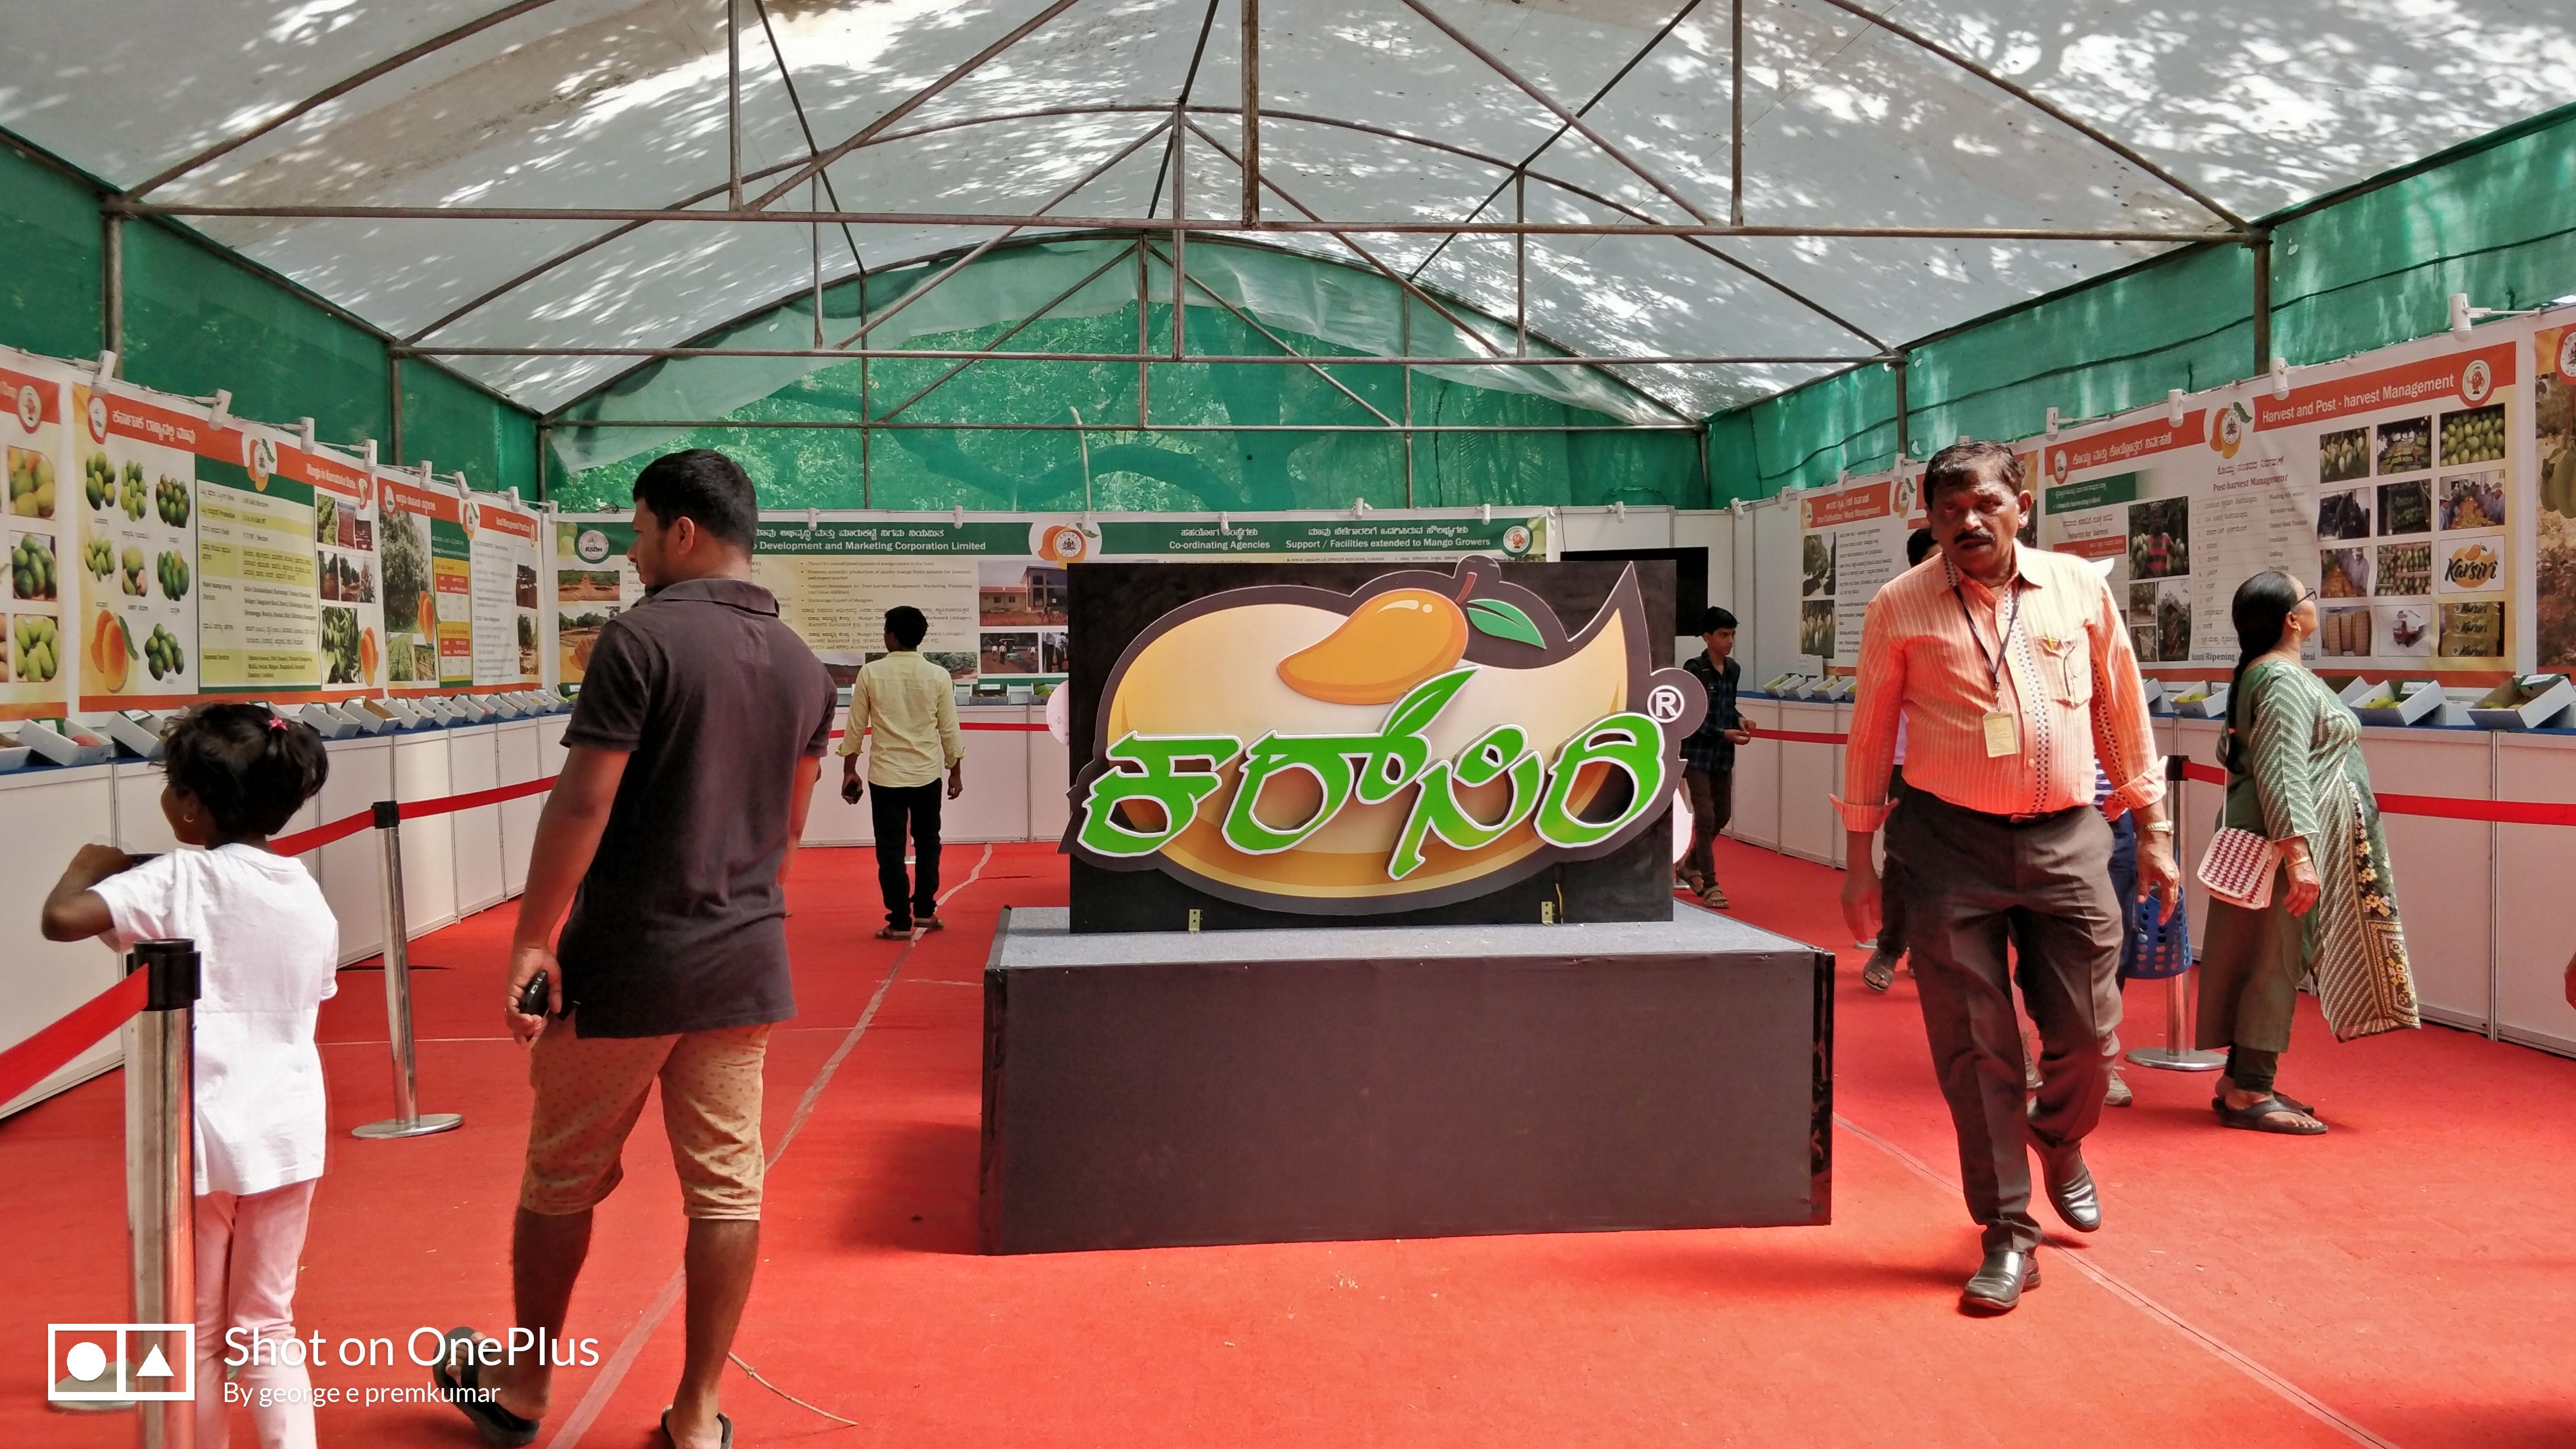 MANGO and Jackfruit Fair in Bengaluru India   from 30th May to 24th June. Initiative of the Government, the Farmers can sell their Products directly to end customers